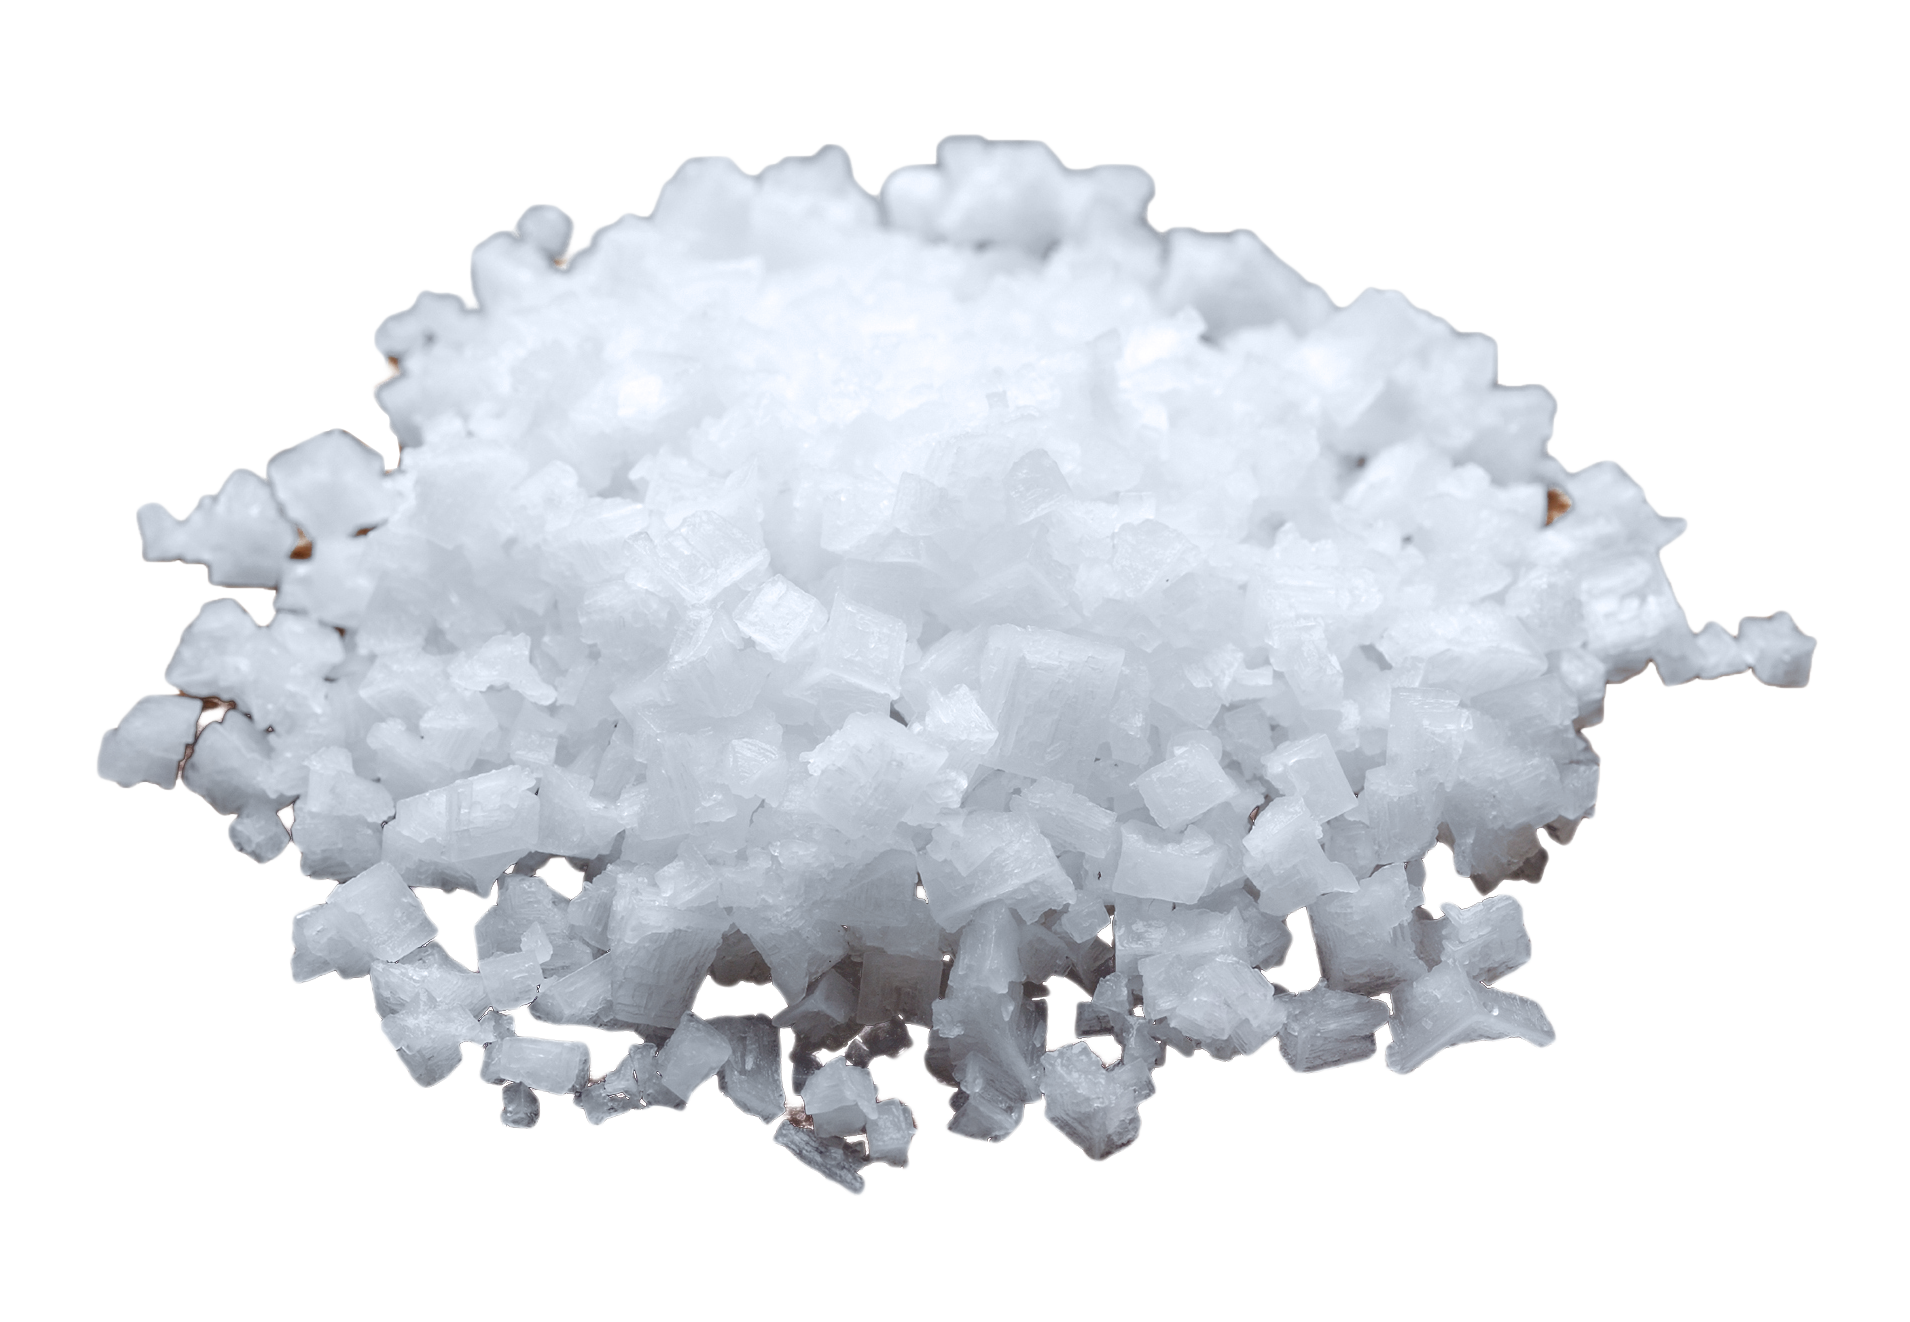 A Pile Of White Crystals